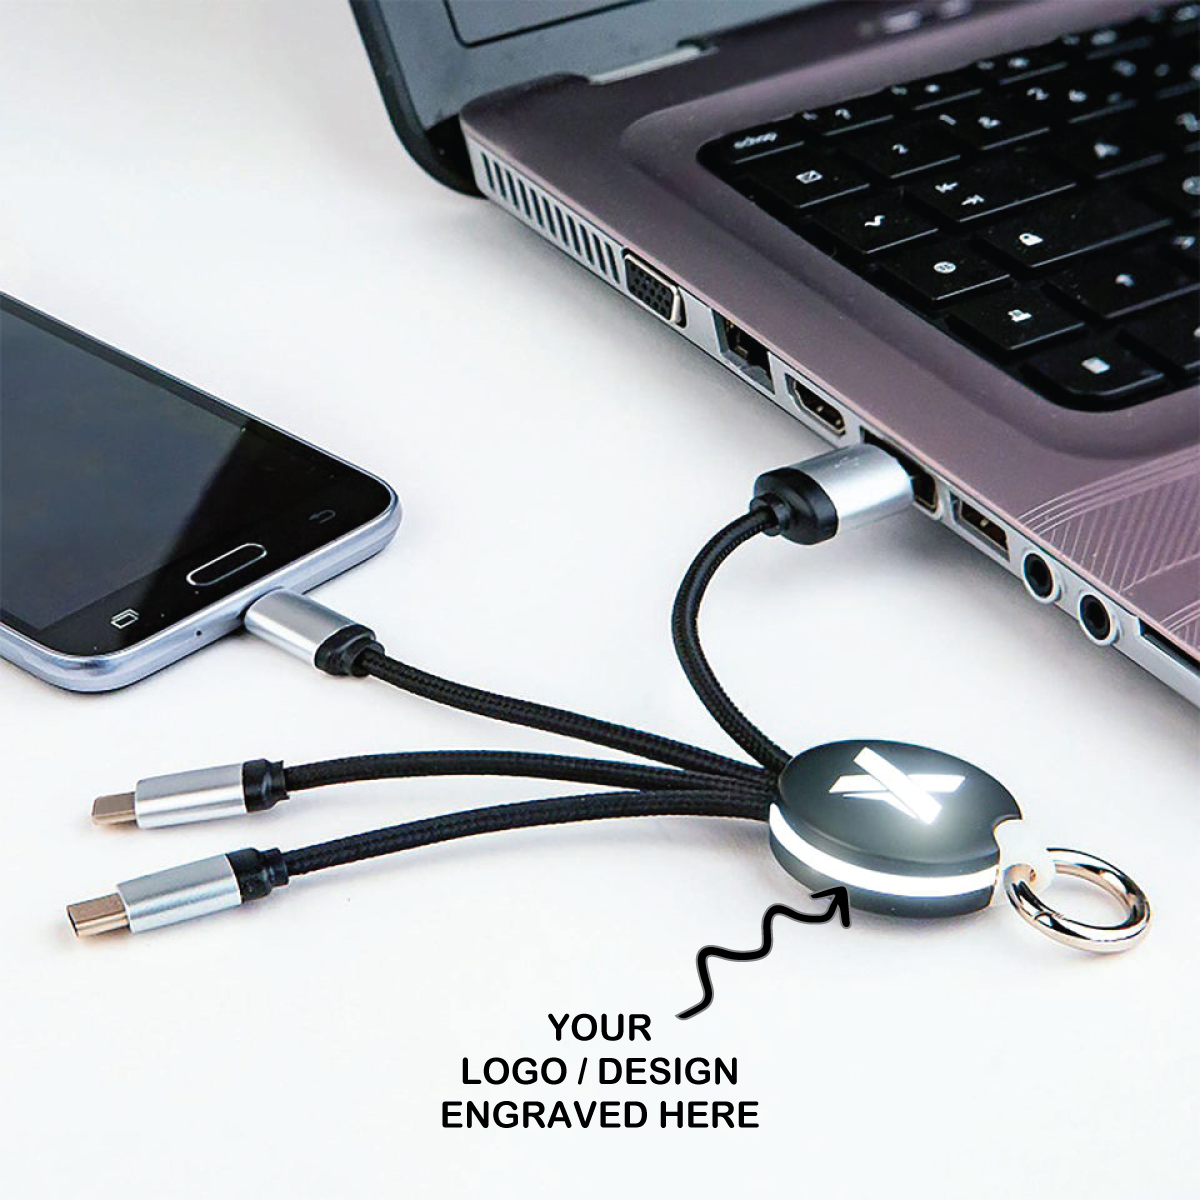 Personalized Engraved Glowing Logo Charger Cable - For Office Use, Personal Use, or Corporate Gifting BGC78